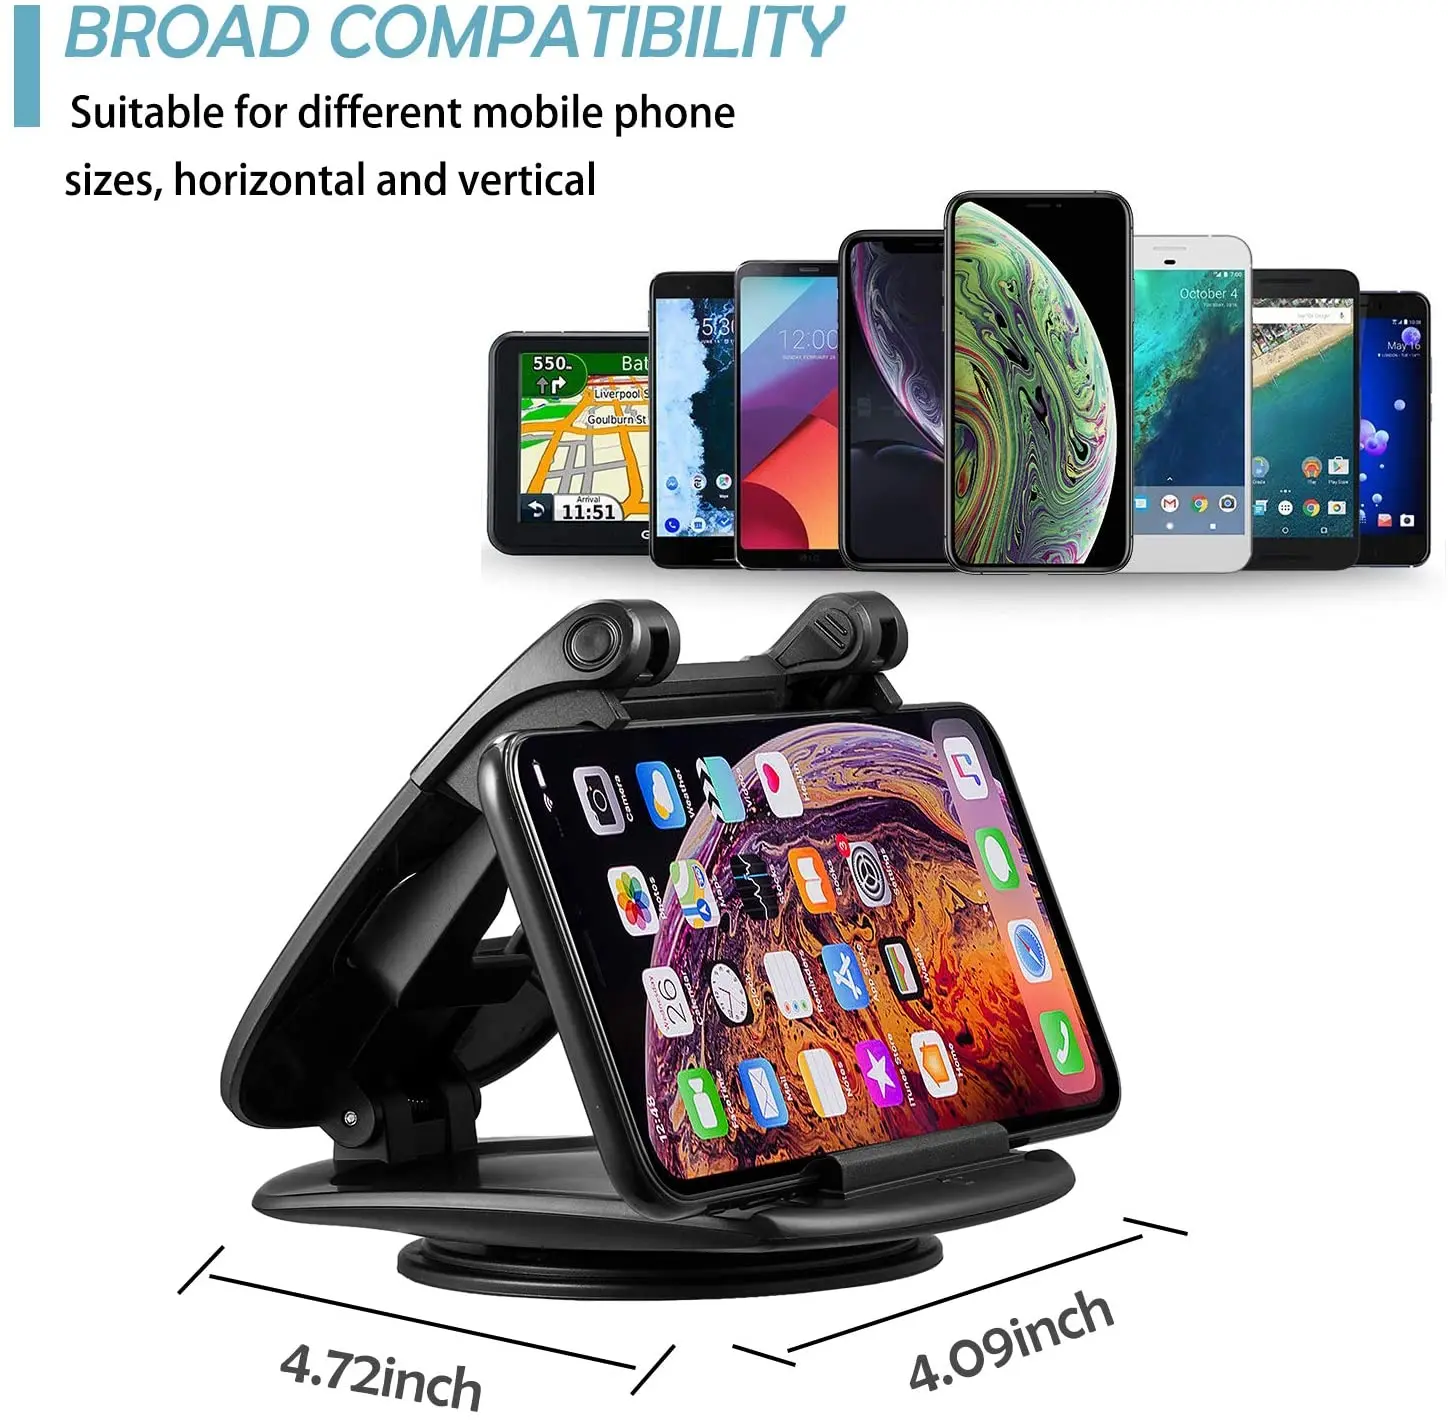 xmxczkj universal 360 degree rotatable dashboard car phone mounts verticallyhorizontally for iphone x xs max 8 free global shipping